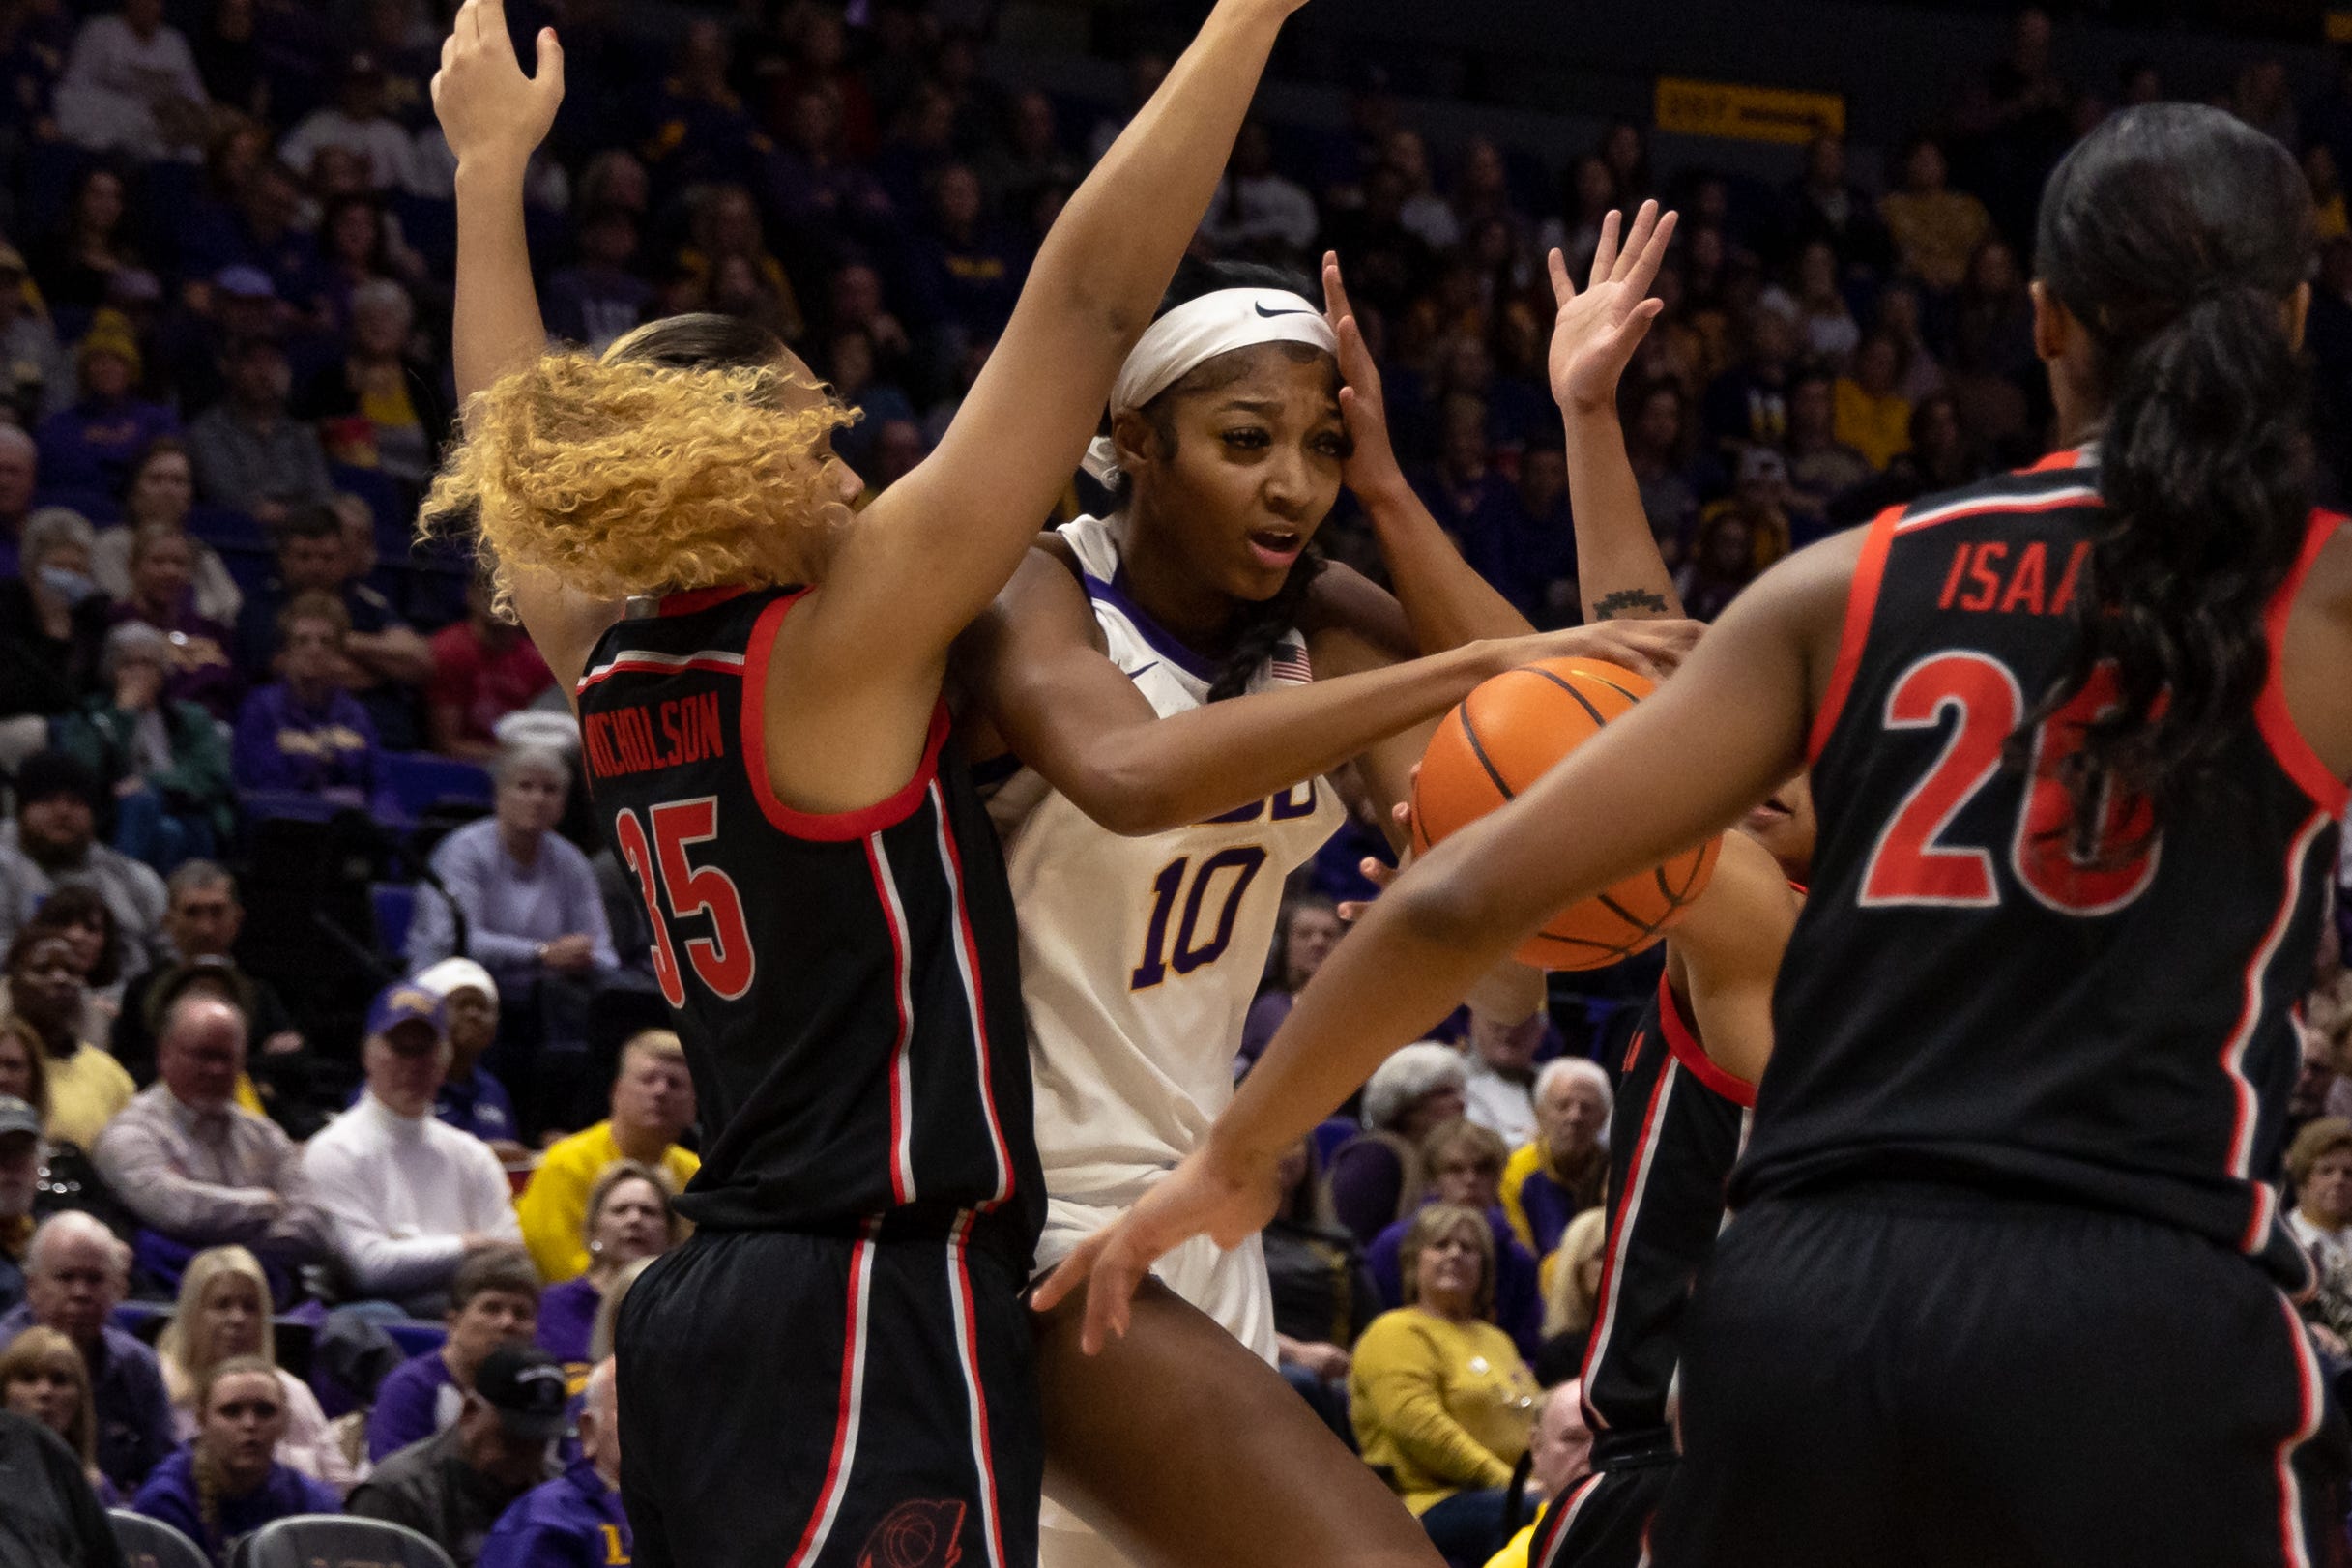 Feb 2, 2023; Baton Rouge, Louisiana, USA;  LSU Lady Tigers forward Angel Reese (10) drives through Georgia Lady Bulldogs forward Javyn Nicholson (35) during the first half at Pete Maravich Assembly Center. Mandatory Credit: Stephen Lew-USA TODAY Sports